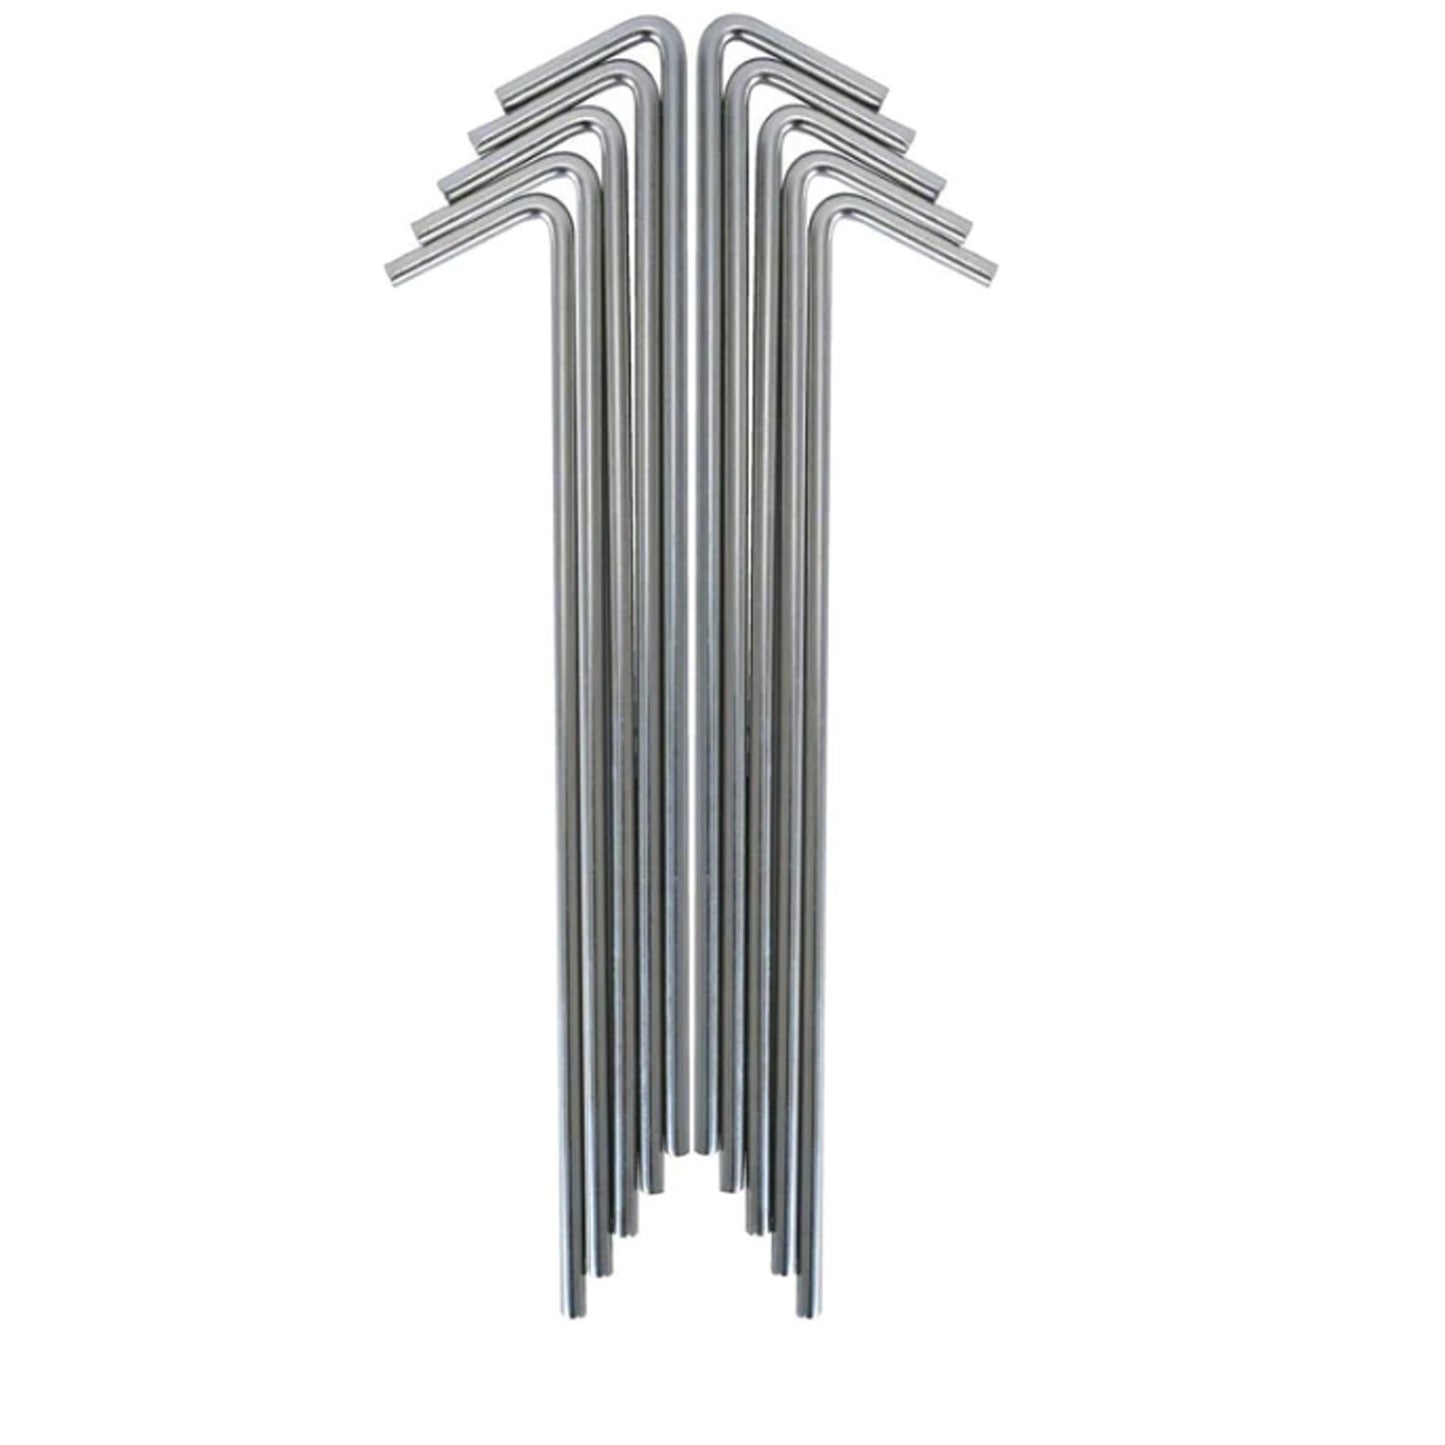 Steel hook tent pegs that are packed in a bag of 10.  Material: Steel  Measurements: 18cm/7 inches